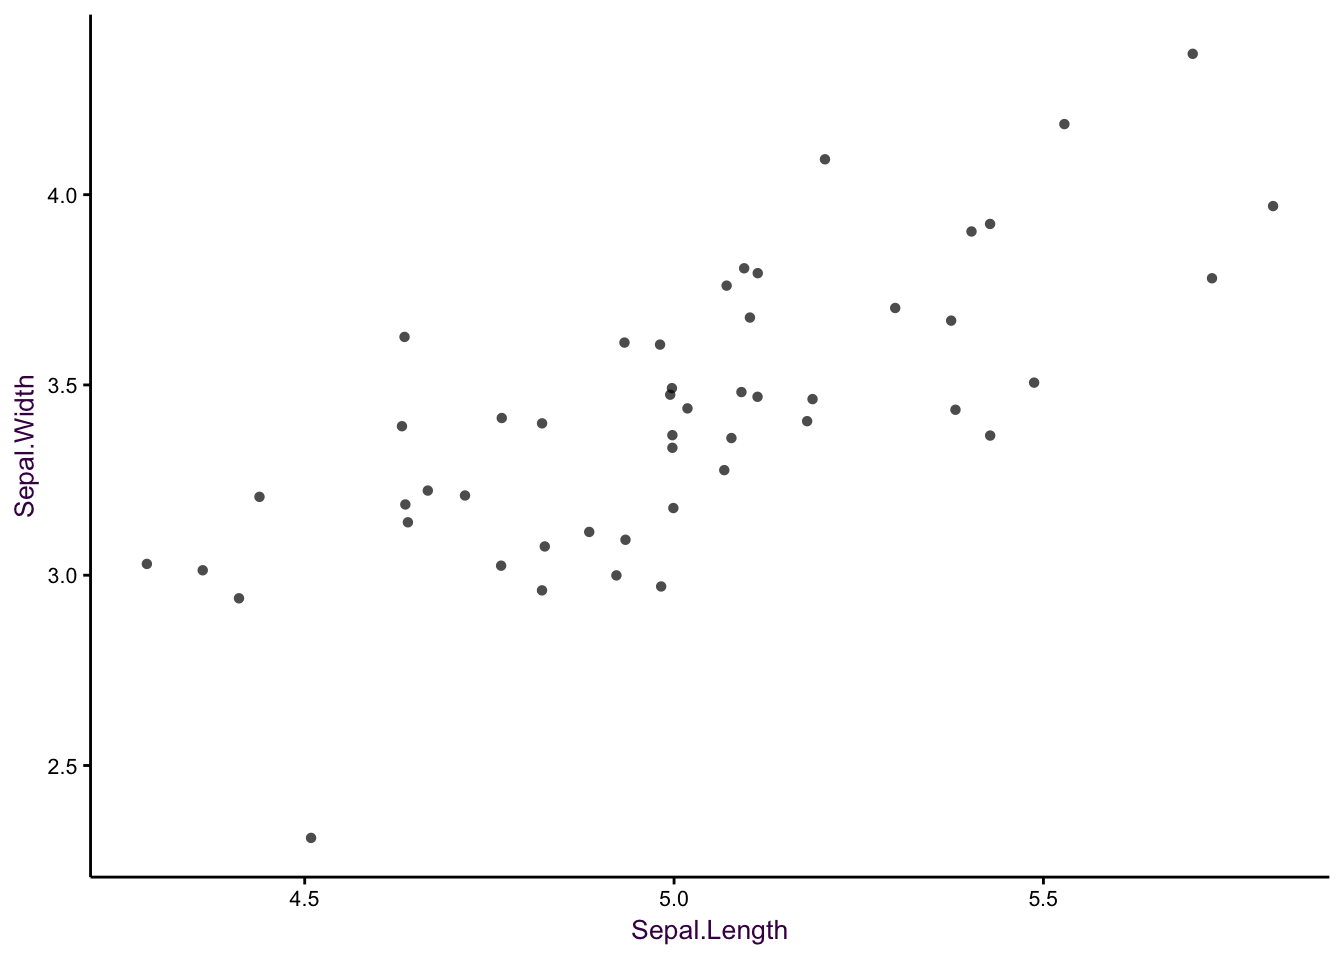 Sepal width versus sepal length for 50 observations of Setosa iris. _Left_: Over-plotting can obscure data points. _Middle_: Jittering is the first step in alleviating over-plotting. _Right_: Removal of unnecessary non-data ink aids clarity.